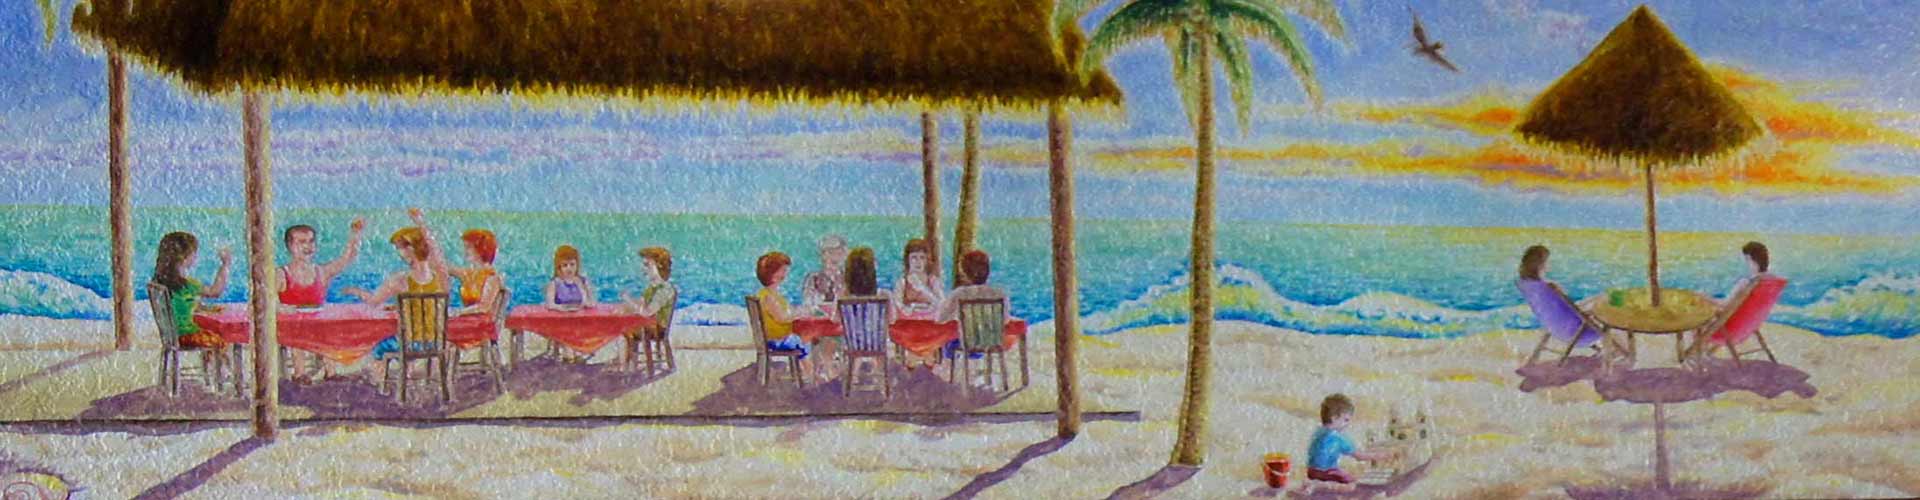 A painting of people sitting at a table on the beach.